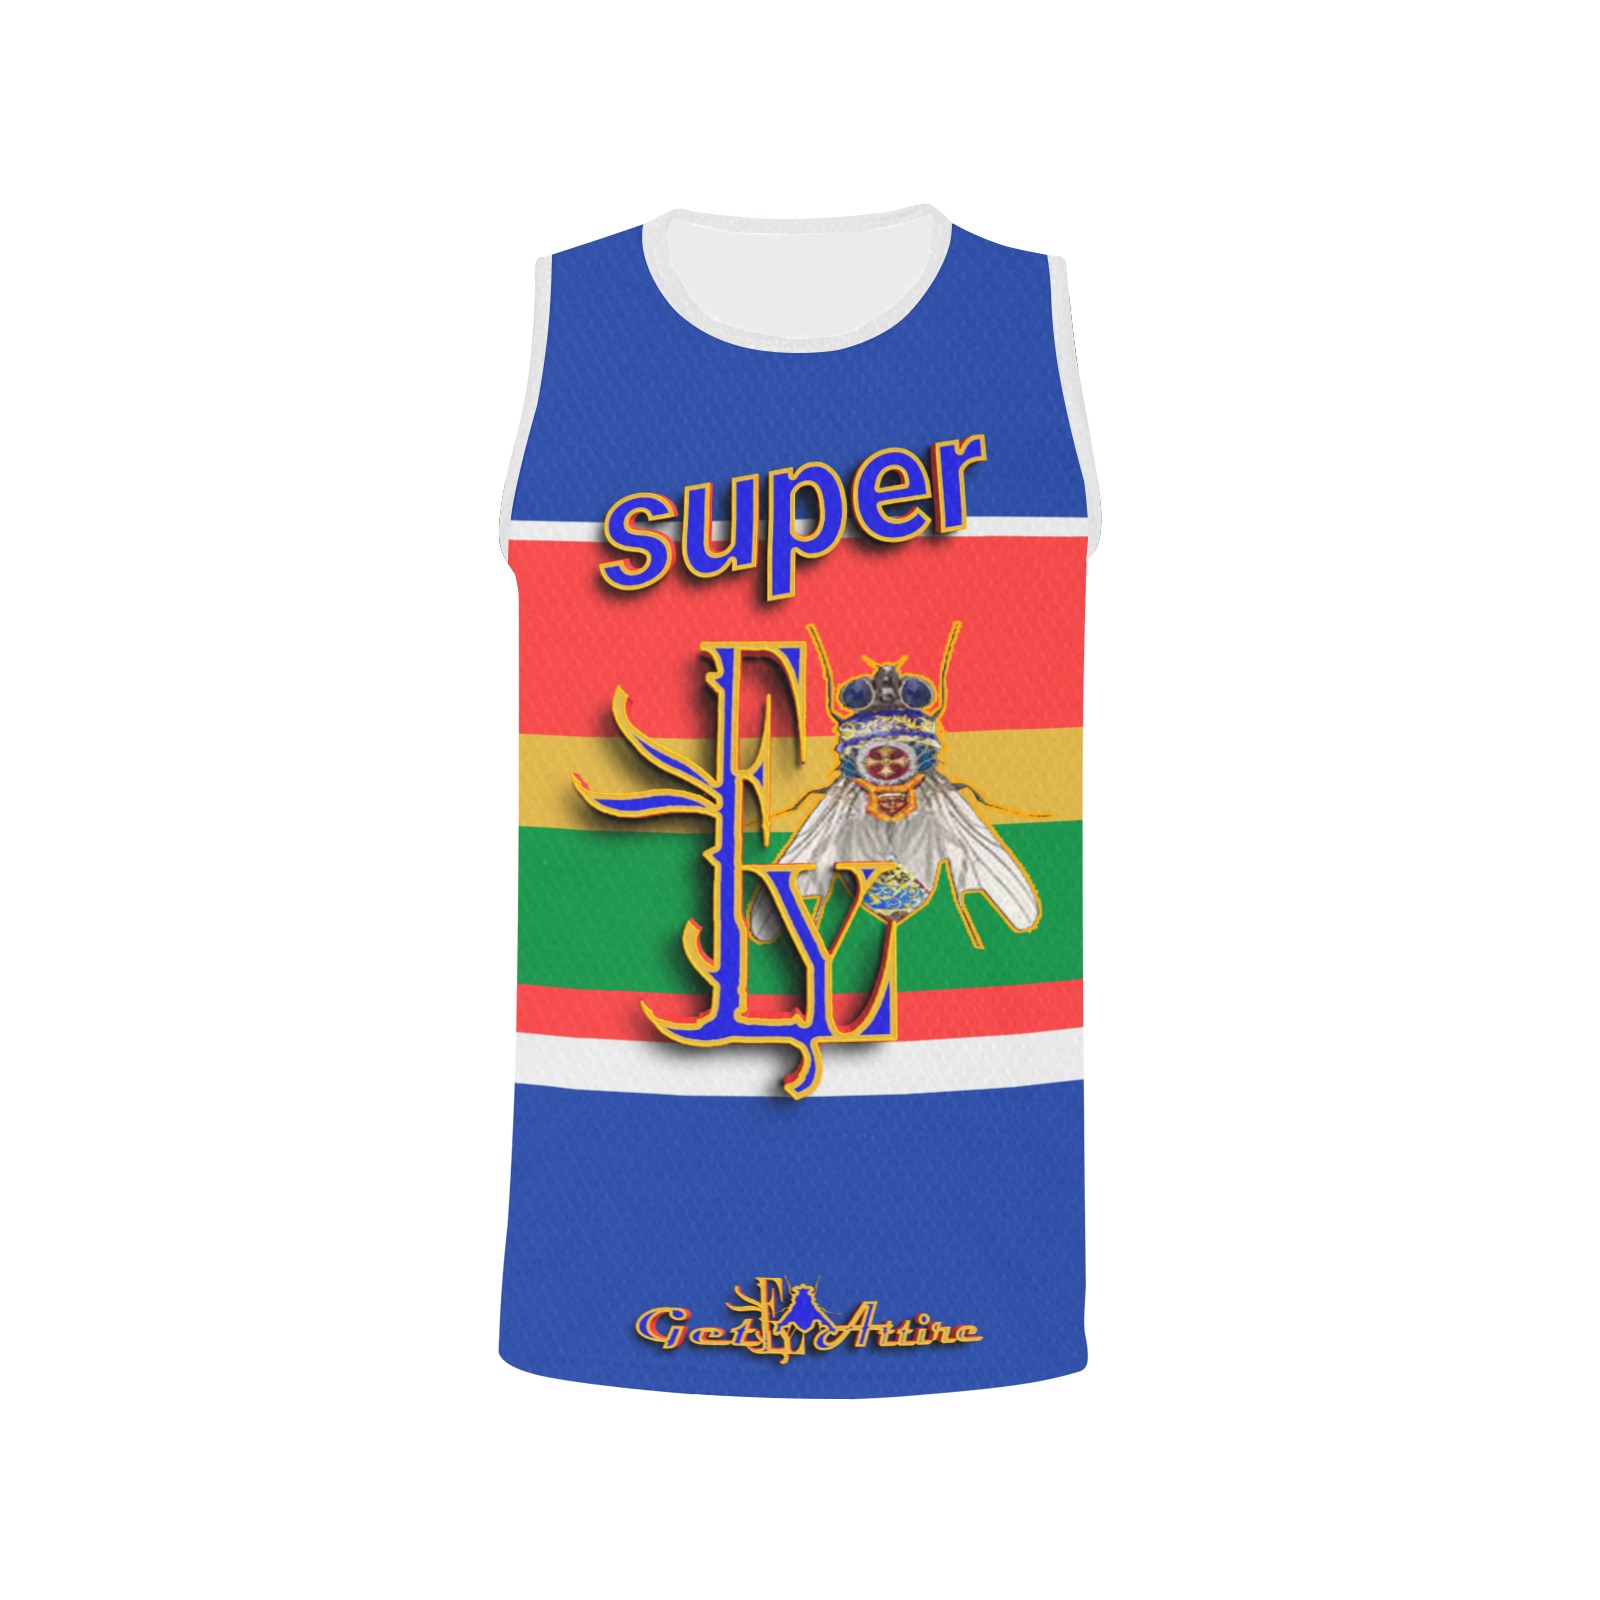 Super Fly Collectable Fly All Over Print Basketball Jersey